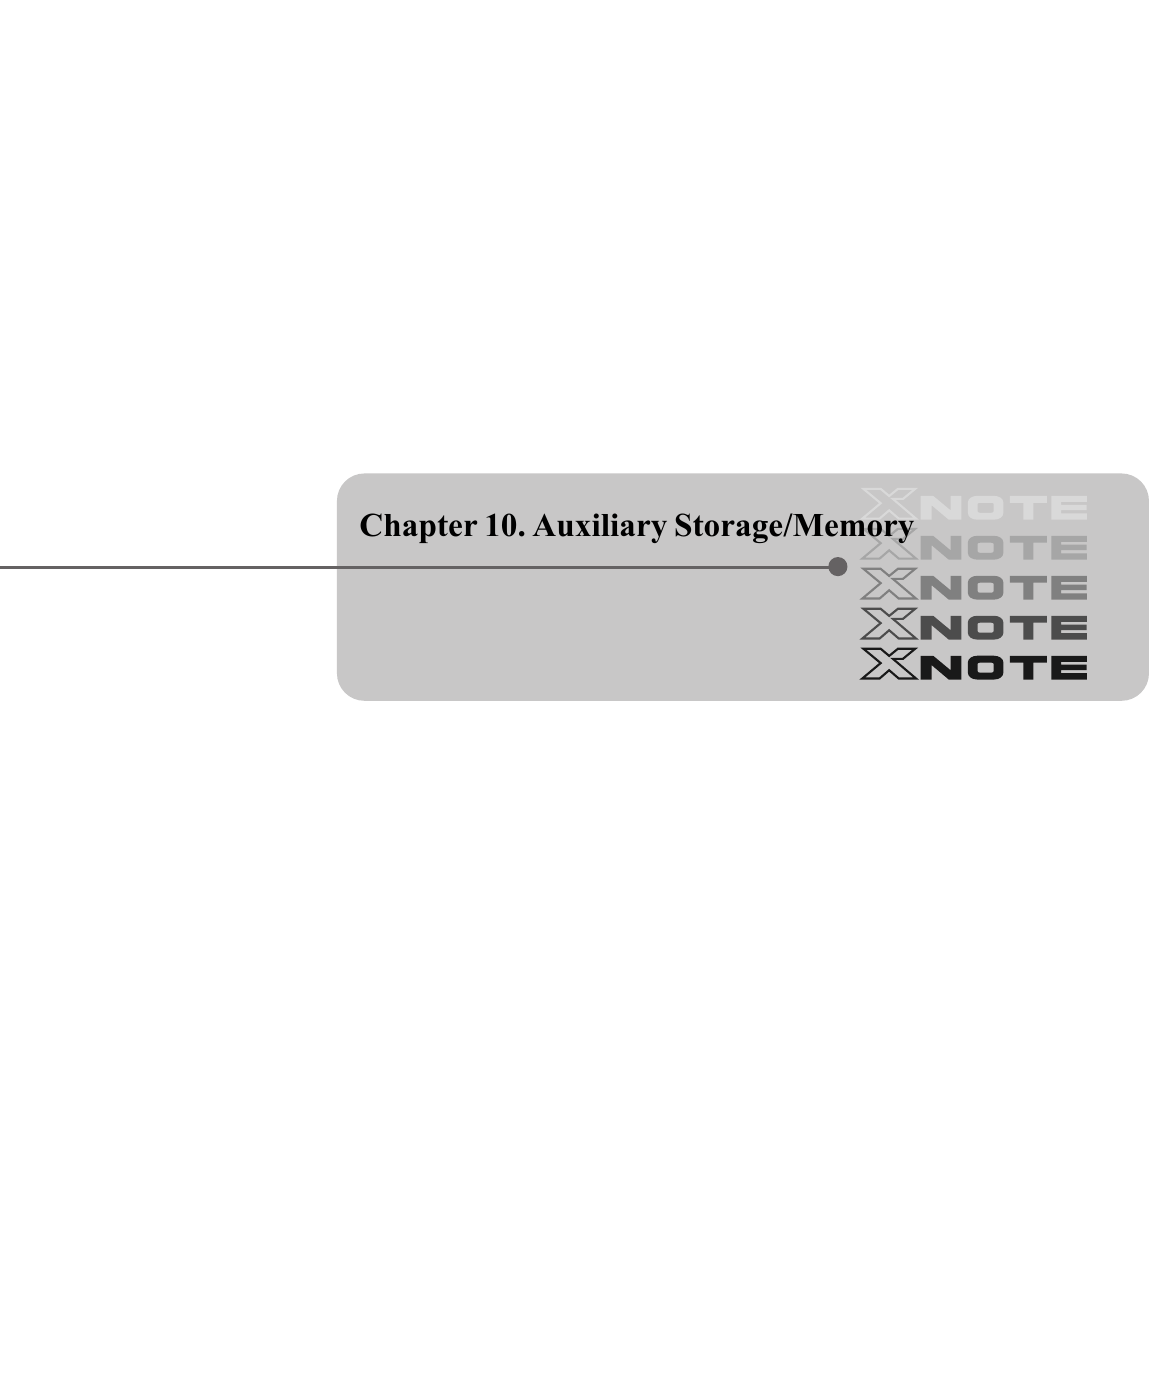 Chapter 10. Auxiliary Storage/Memory